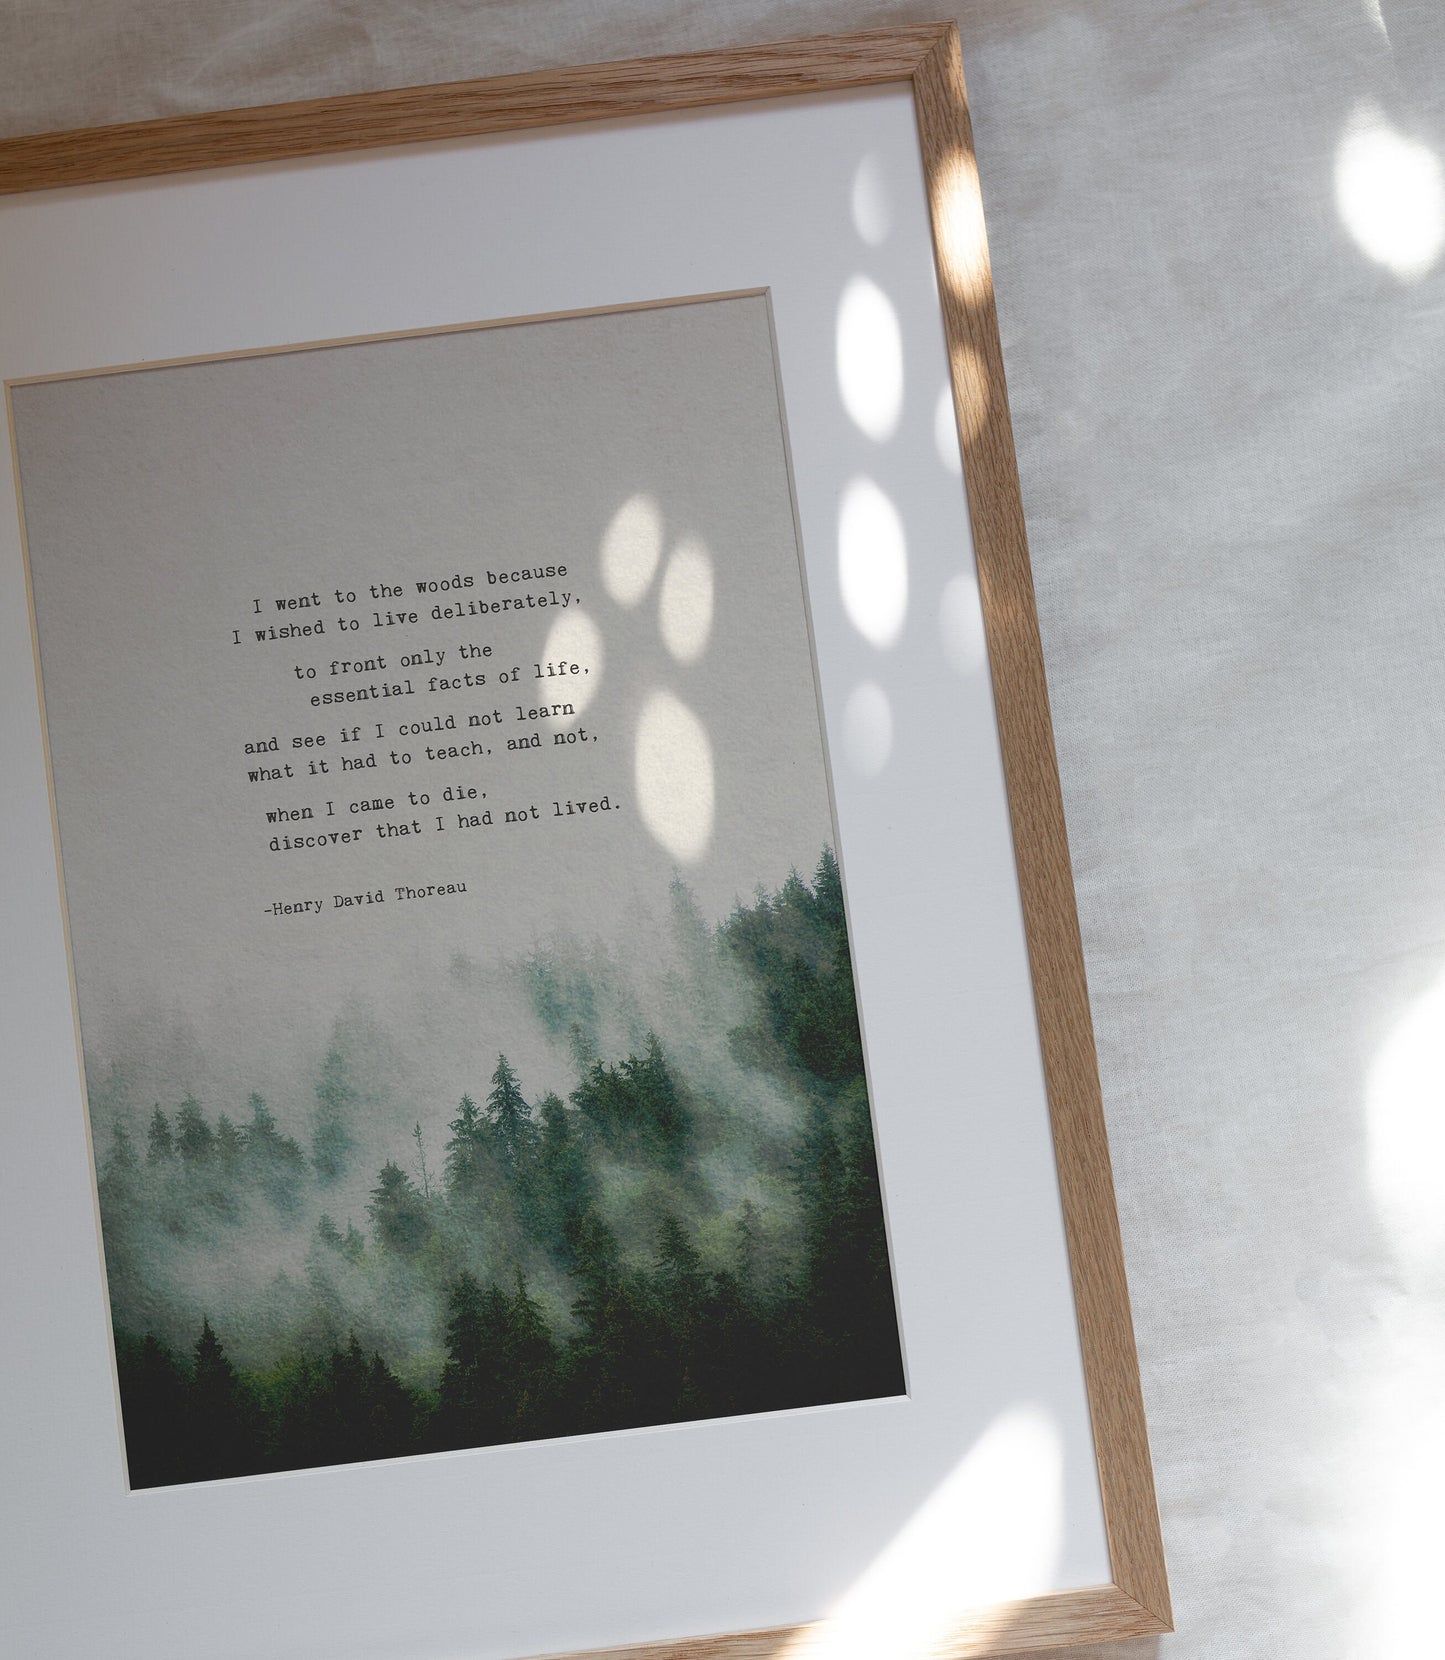 Henry David Thoreau quote print from Walden “I went to the woods because I wished to live deliberately..."